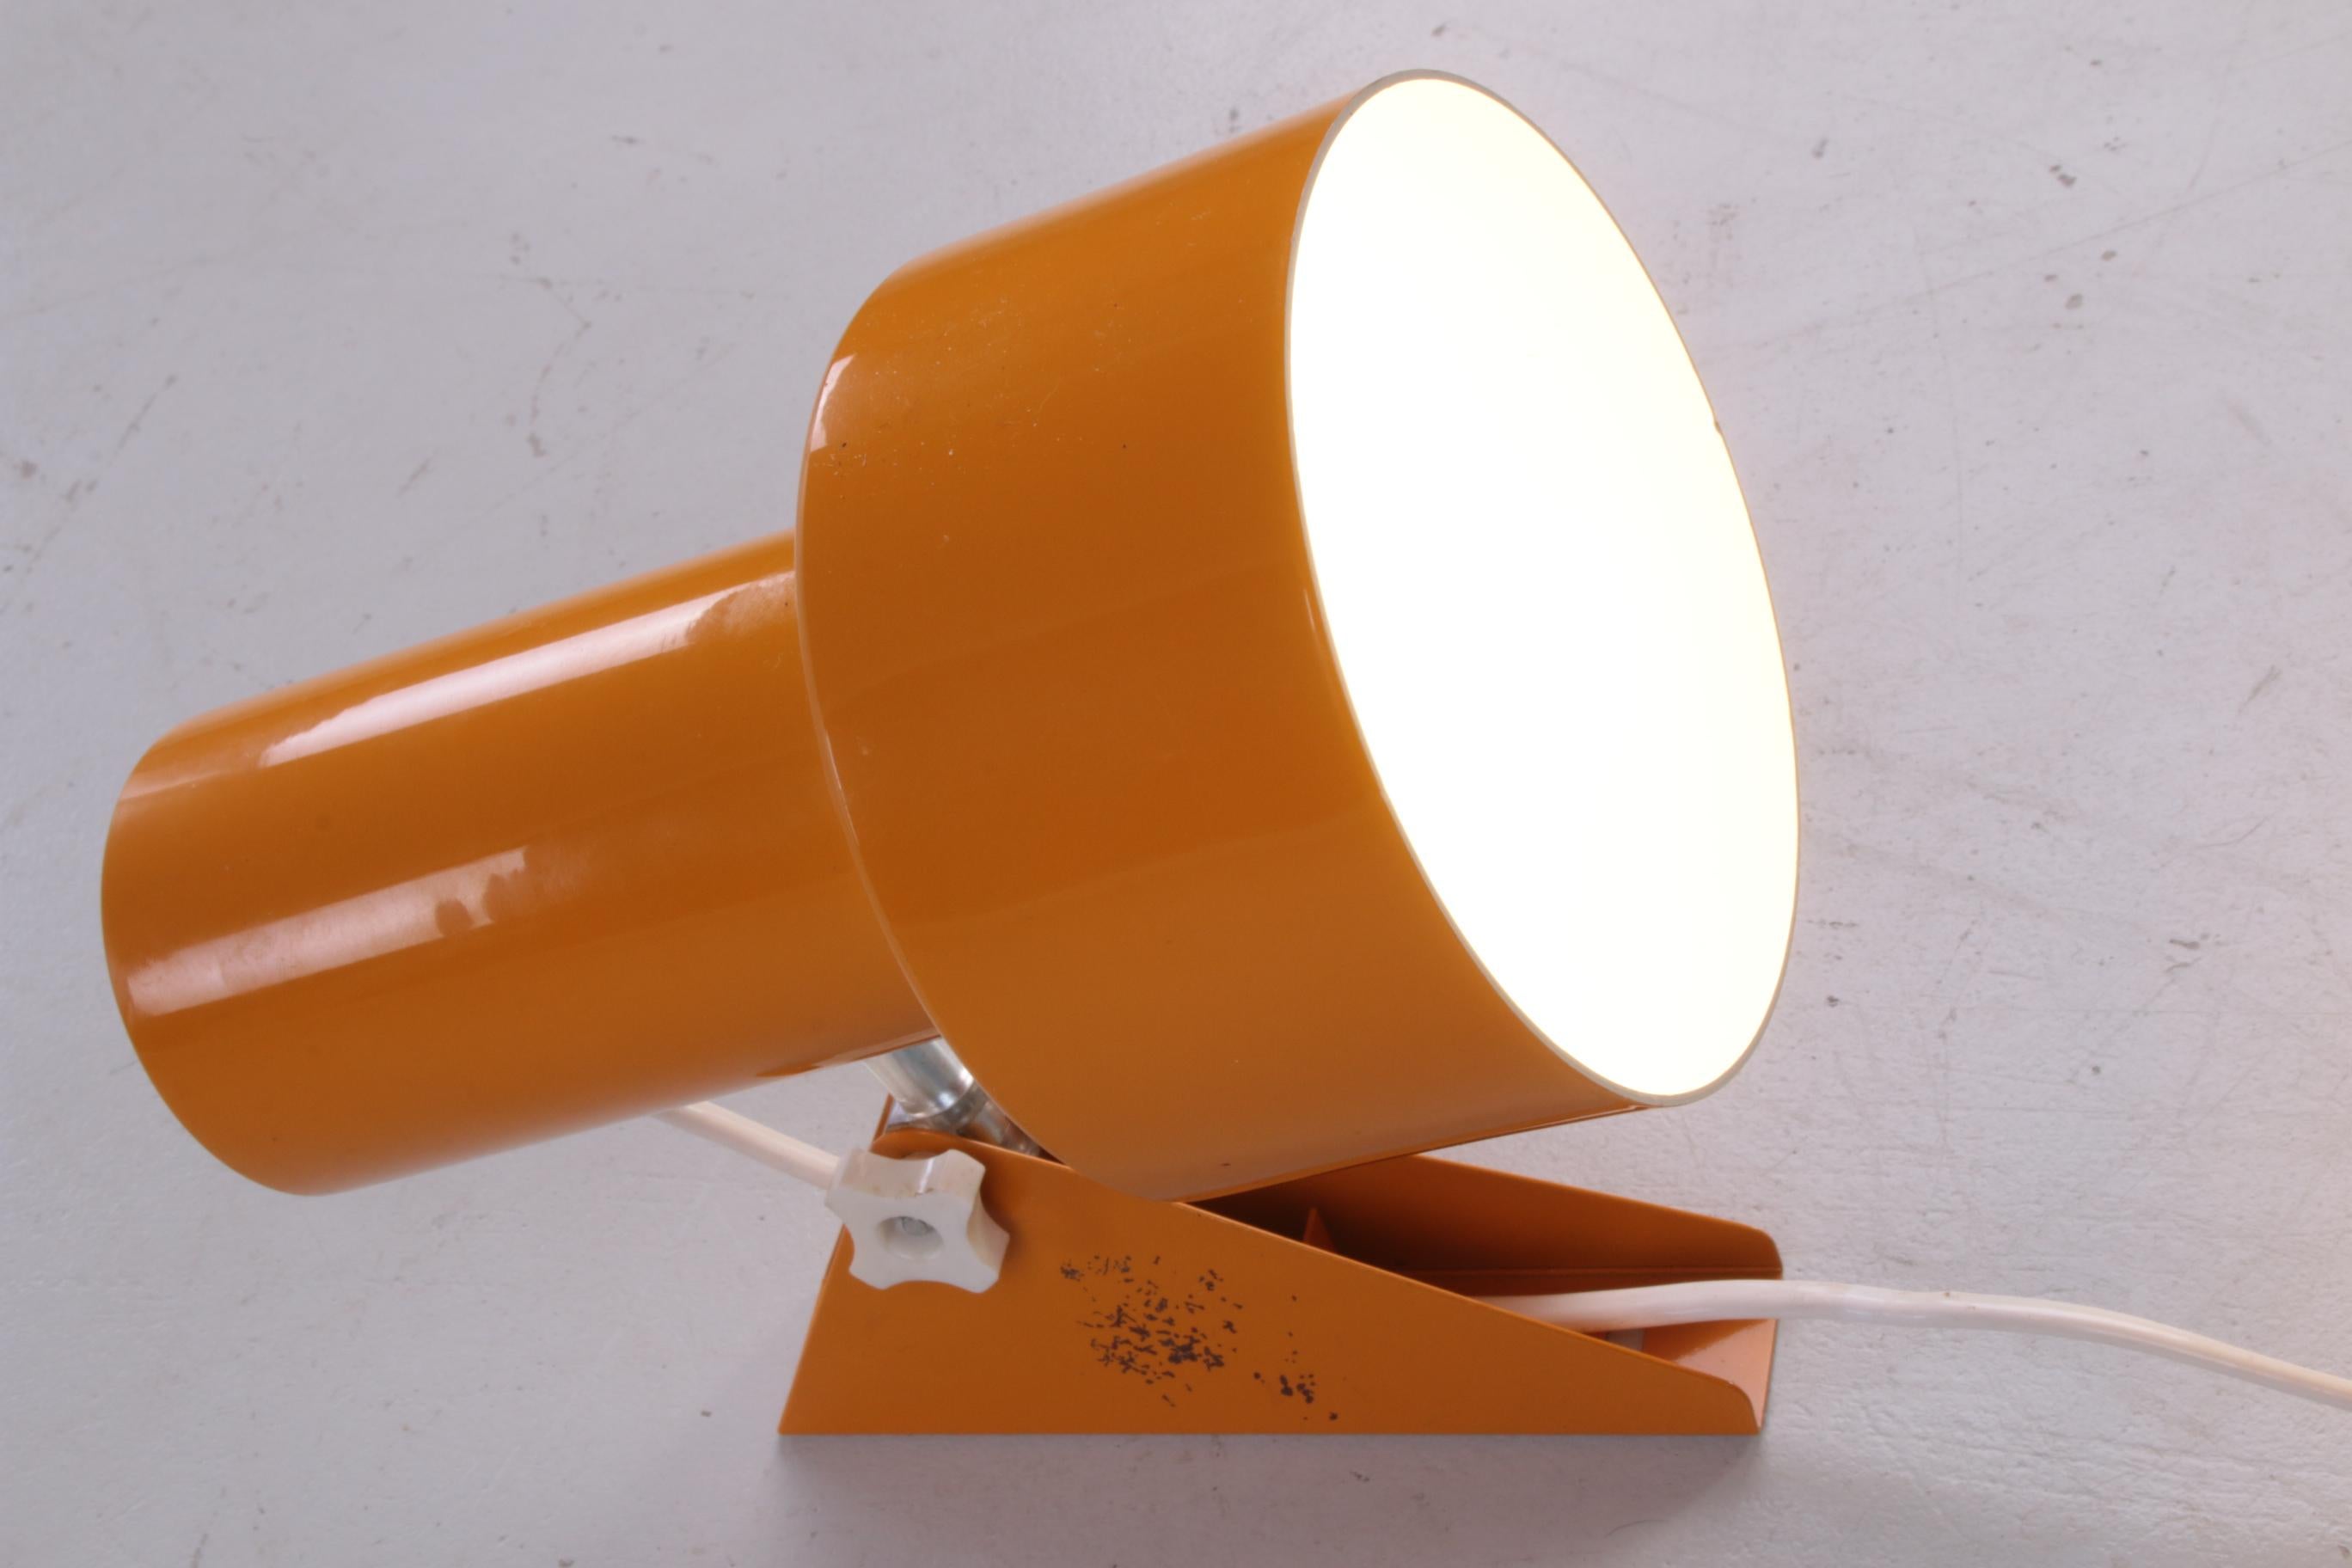 This beautiful ocher yellow spot comes from Denmark and was produced in the 1960s.

This spot is easily adjustable and can therefore be used to illuminate a beautiful wall decoration or of course as a reading light / night light.

The lamp has a